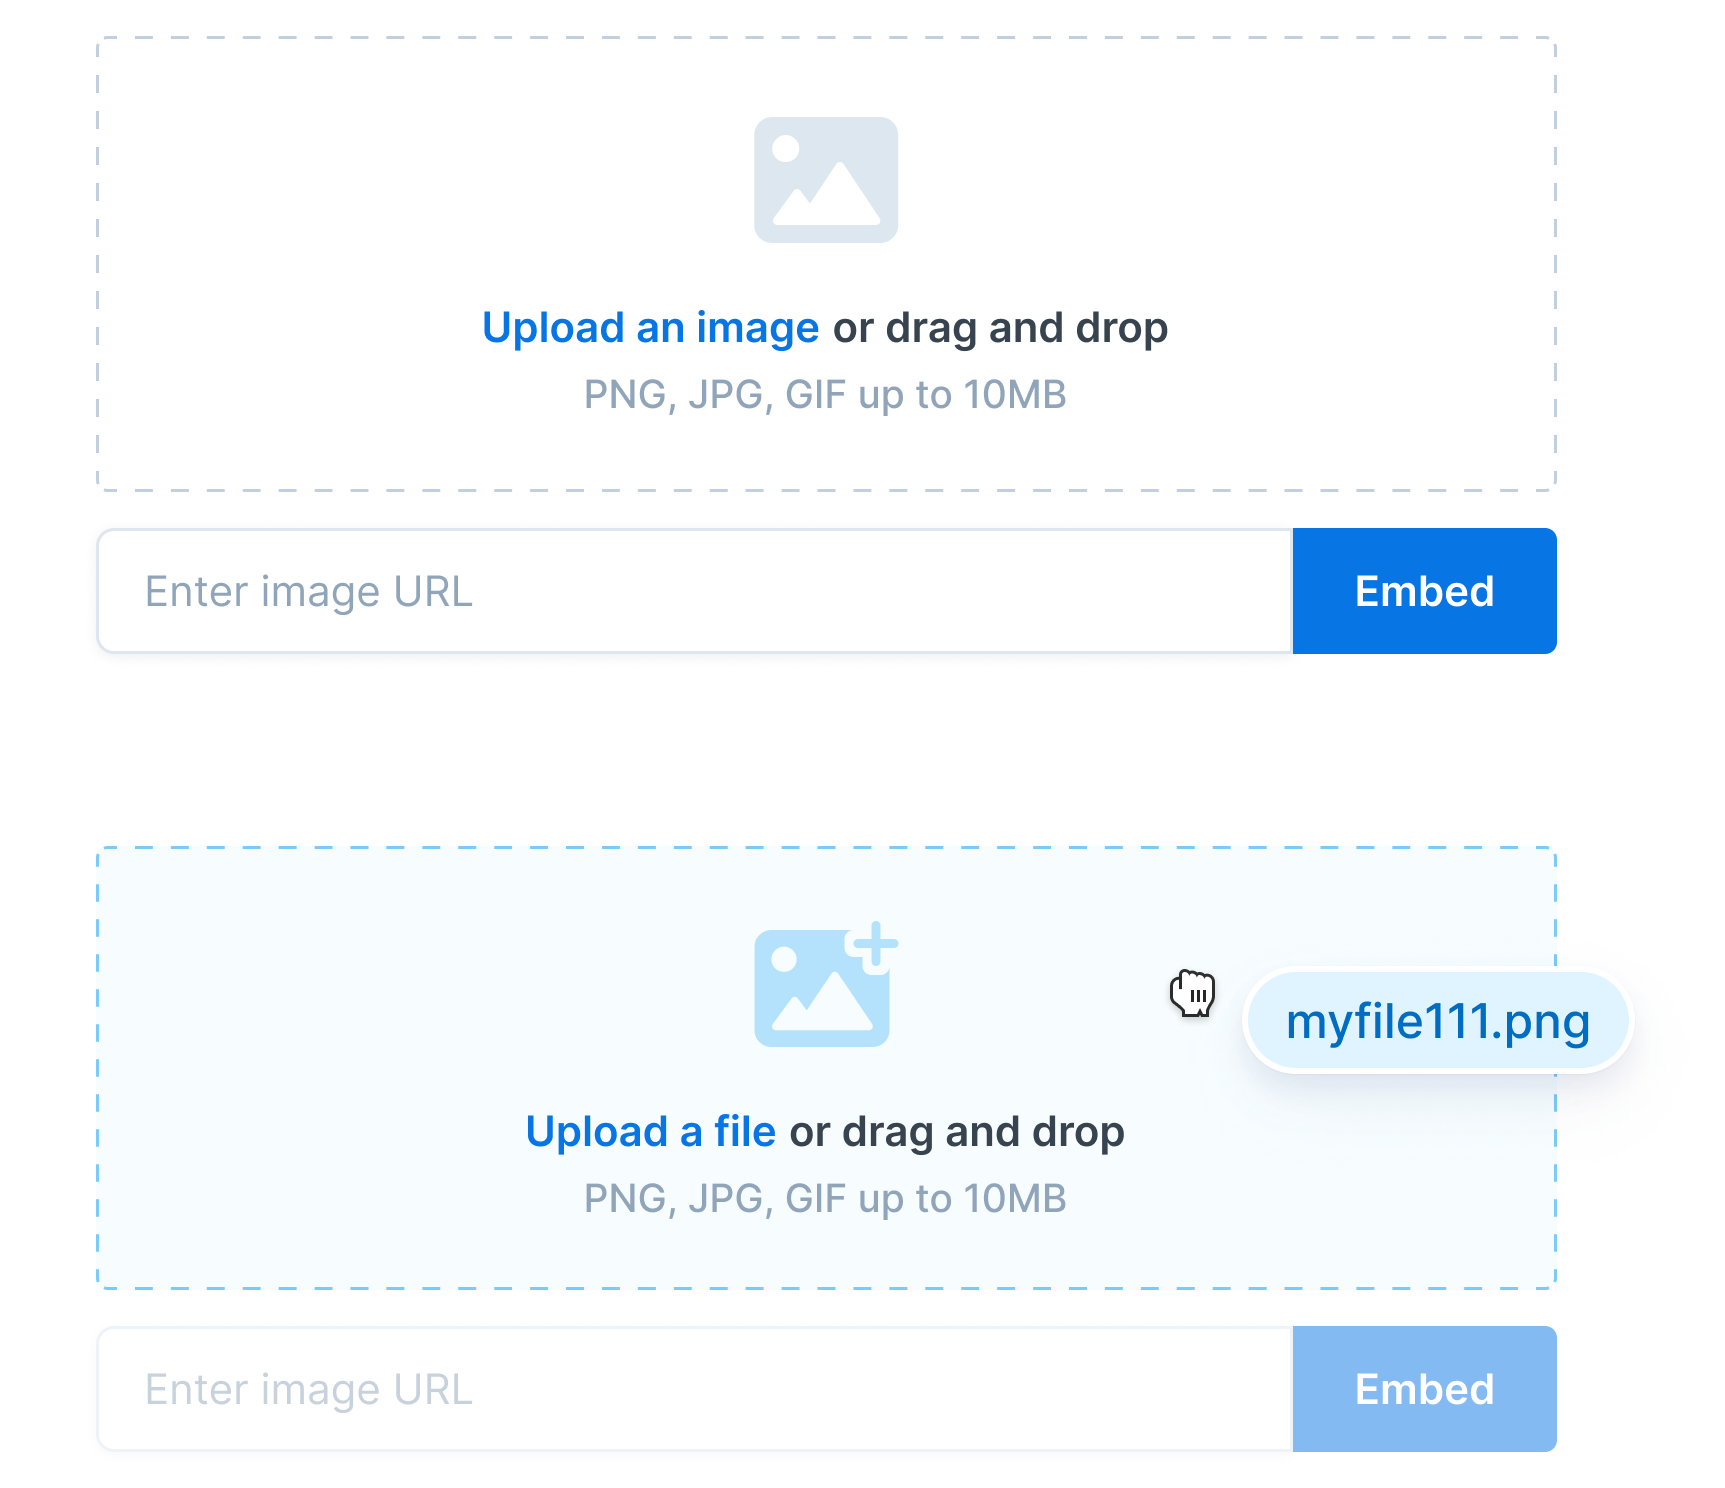 Two placeholder screens. The first shows a clear CTA in the middle for users to upload an image. The second shows a user dragging and dropping a file into the area.